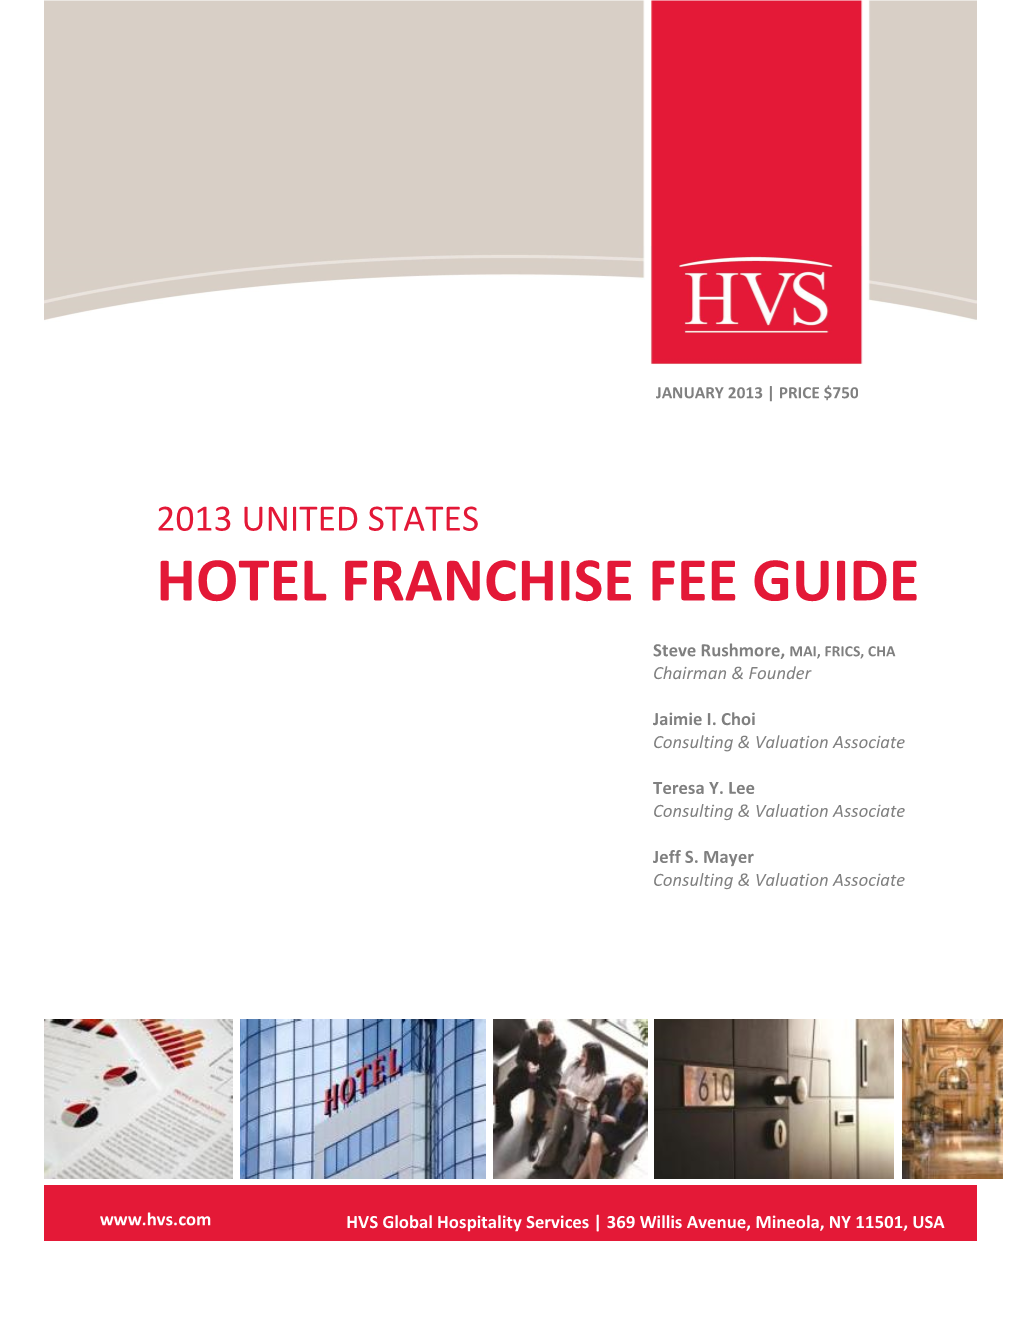 2013 United States Hotel Franchise Fee Guide